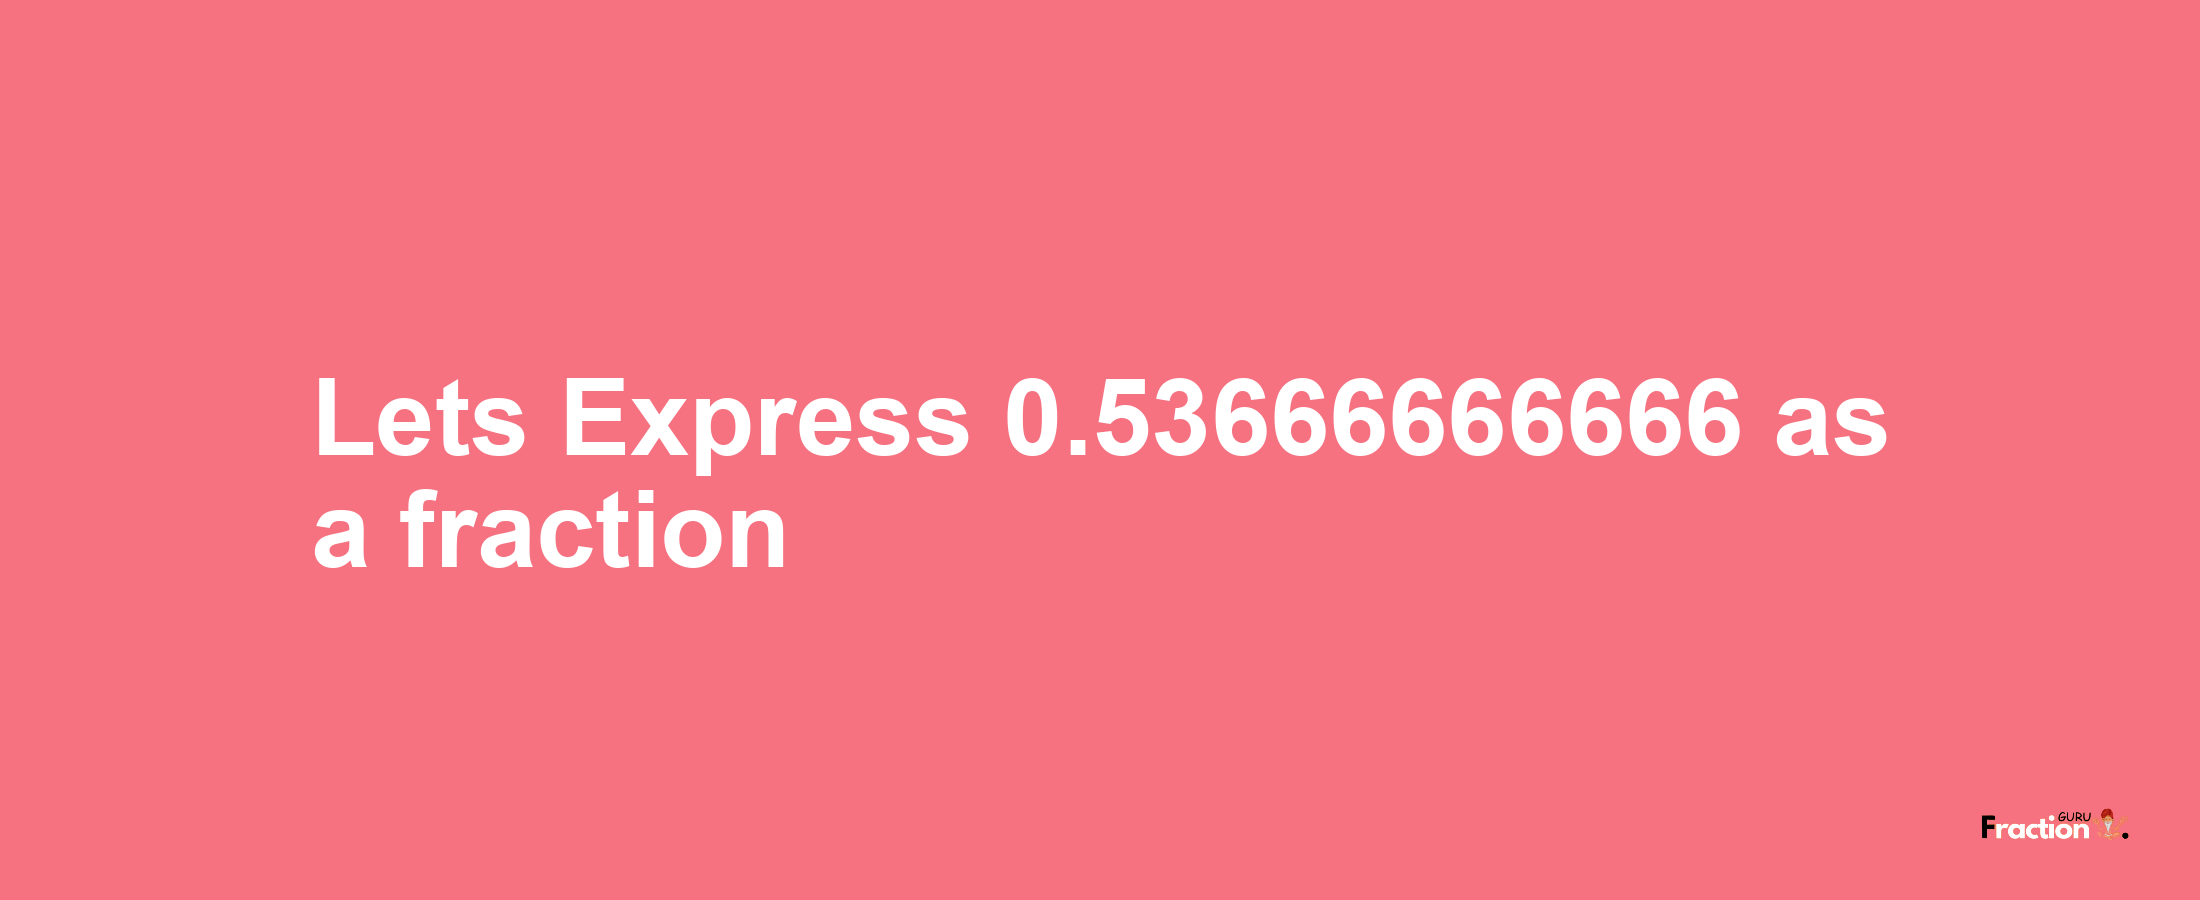 Lets Express 0.53666666666 as afraction